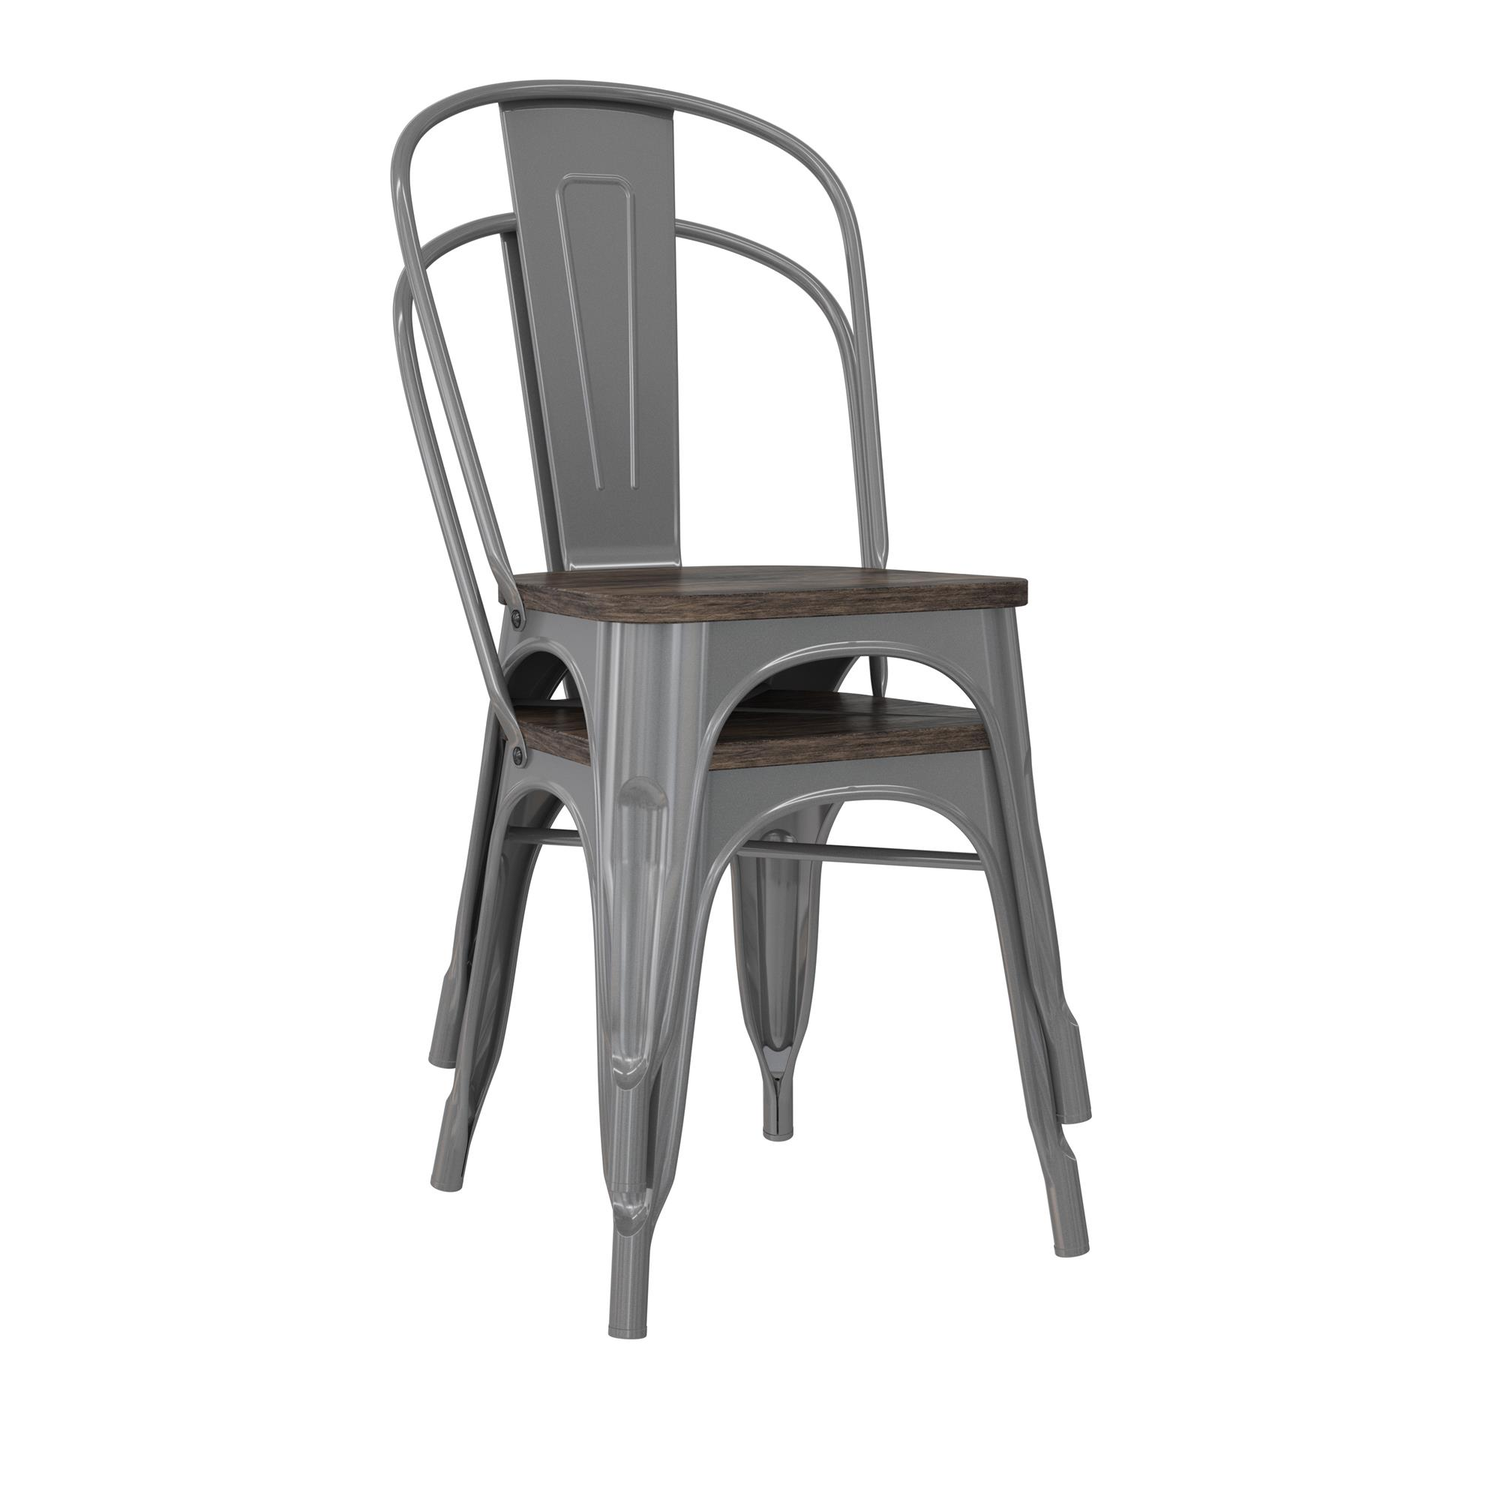 BHG Aidan Stackable Metal Dining Chair with Wood Seat, Silver, Set of 2